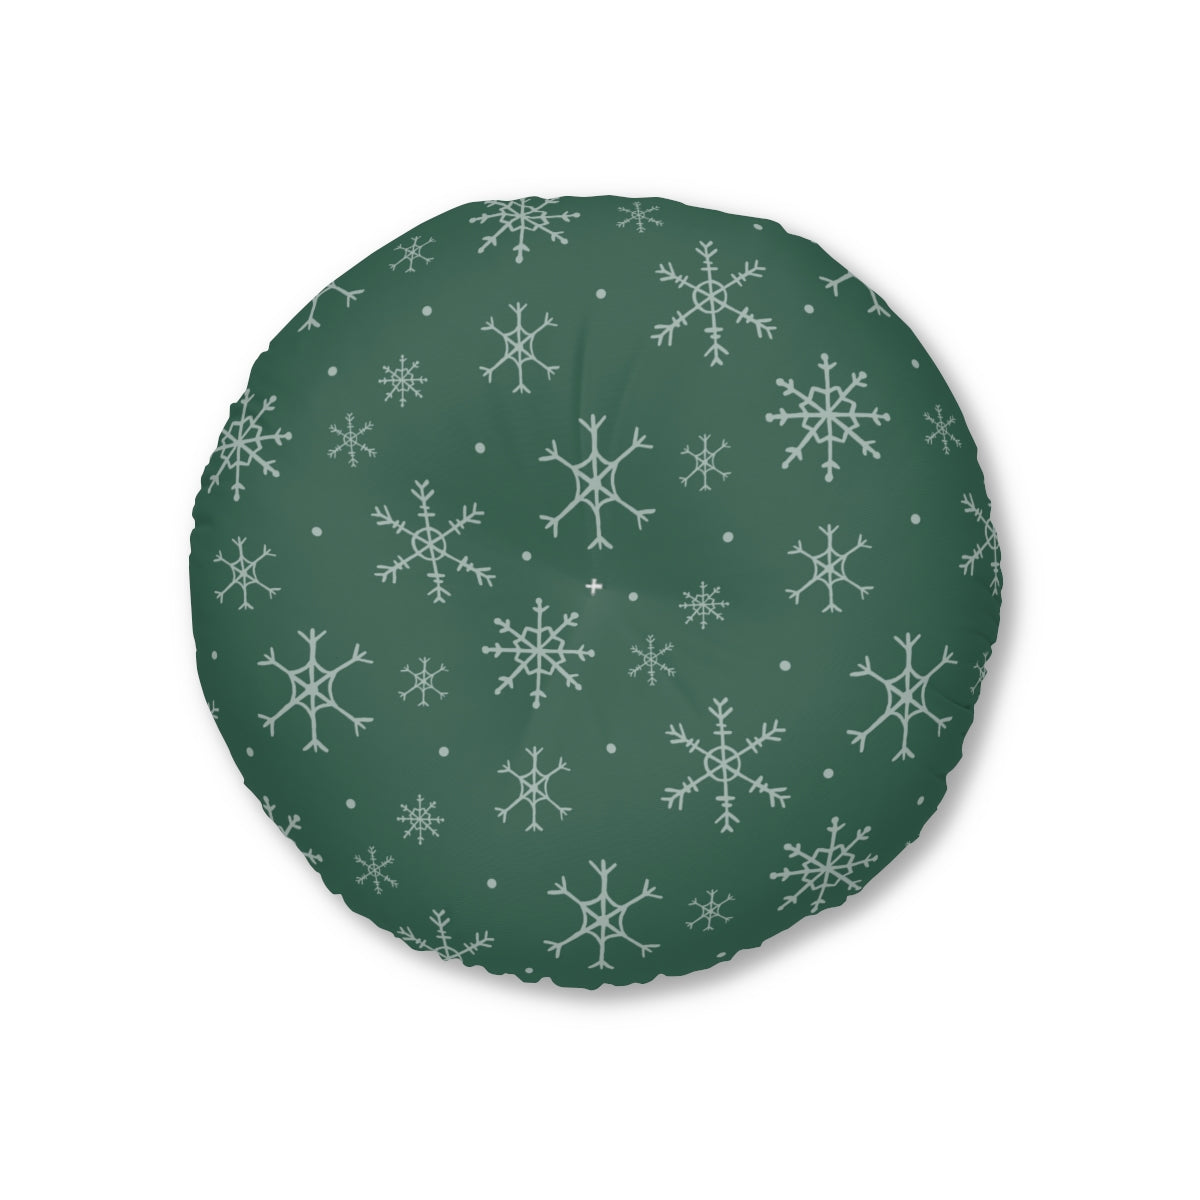 Lifestyle Details - Green Round Tufted Holiday Floor Pillow - Snowflakes - 26x26 - Front View